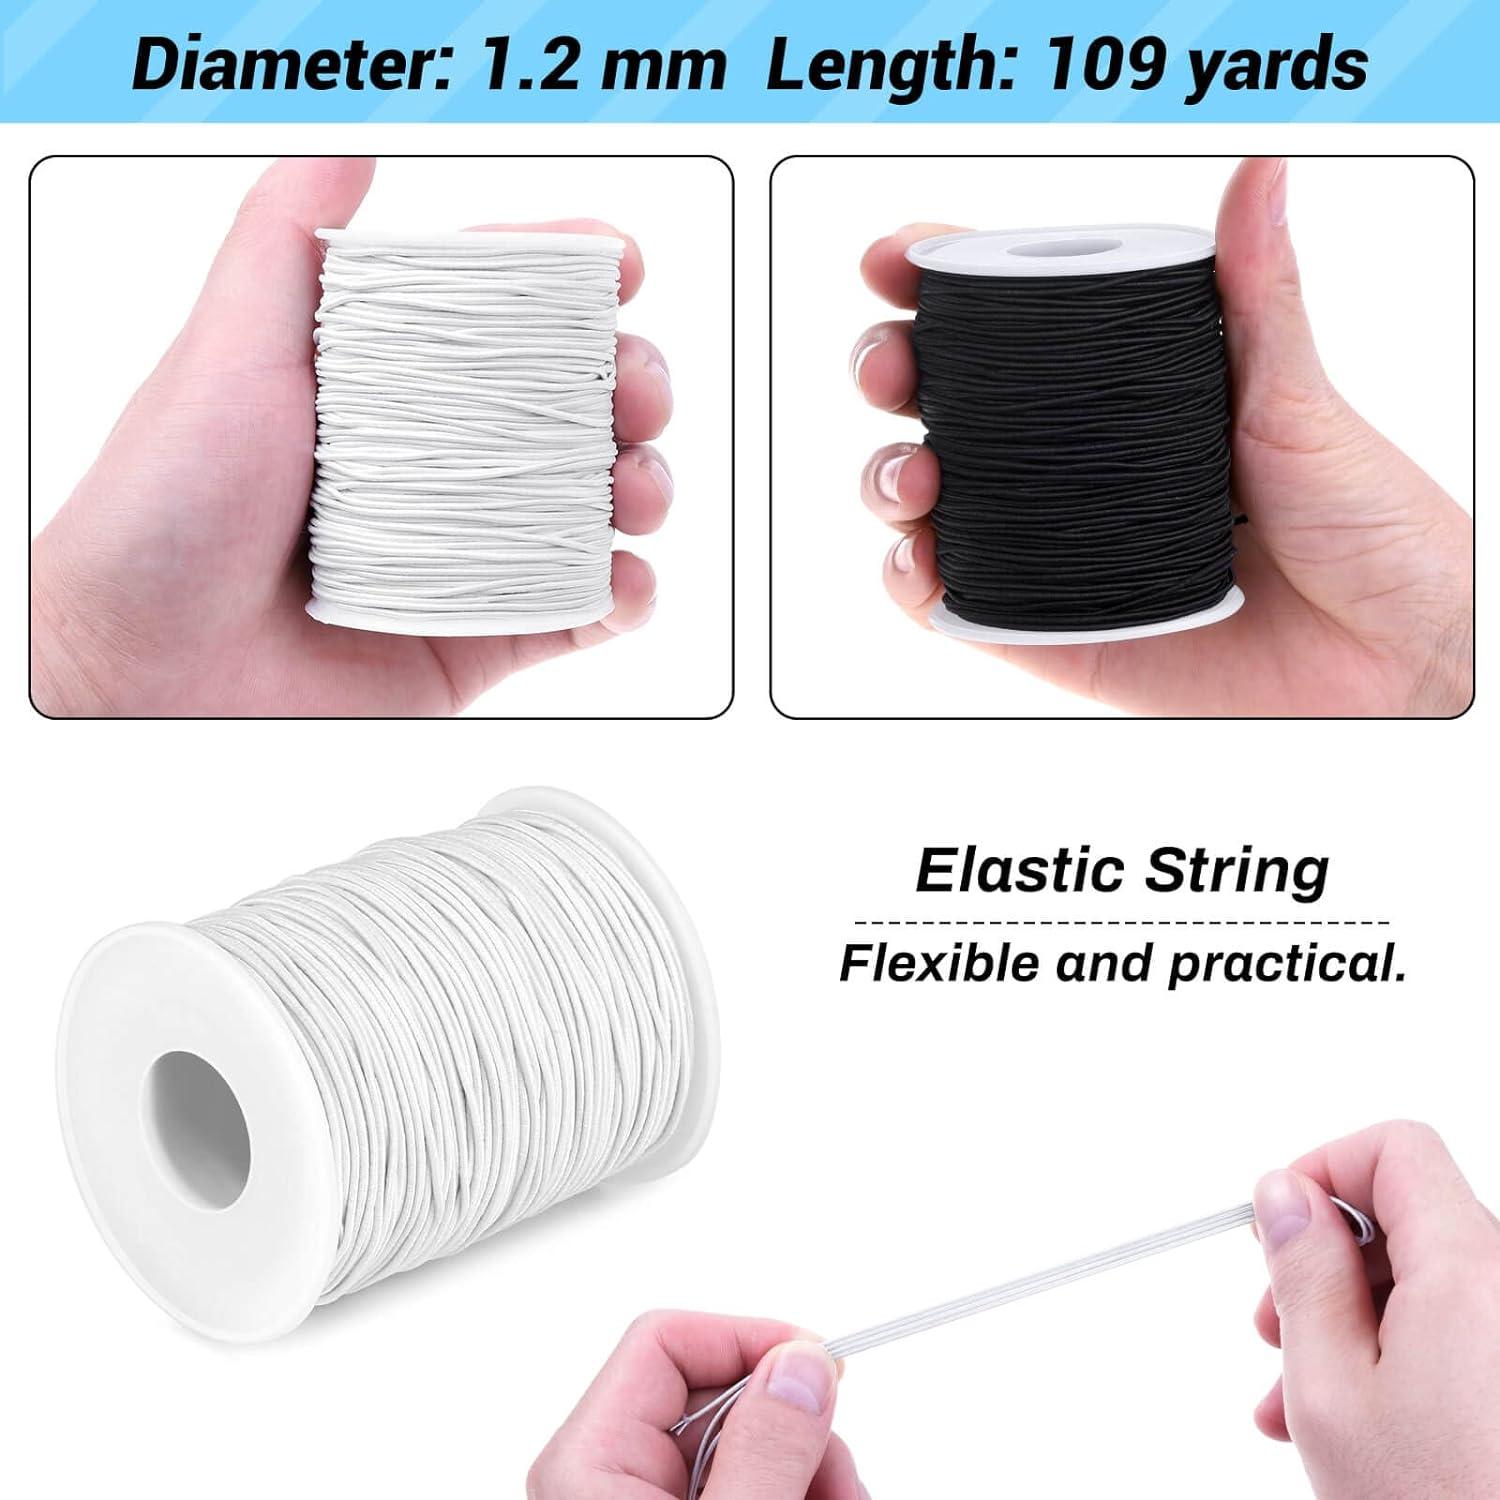 Elastic String Cord Selizo 2 Pack Stretchy String for Bracelets Necklace  Beading Jewelry Making and Sewing (1.2 MM 109 Yards Black & White) 1.2 MM  Black and White